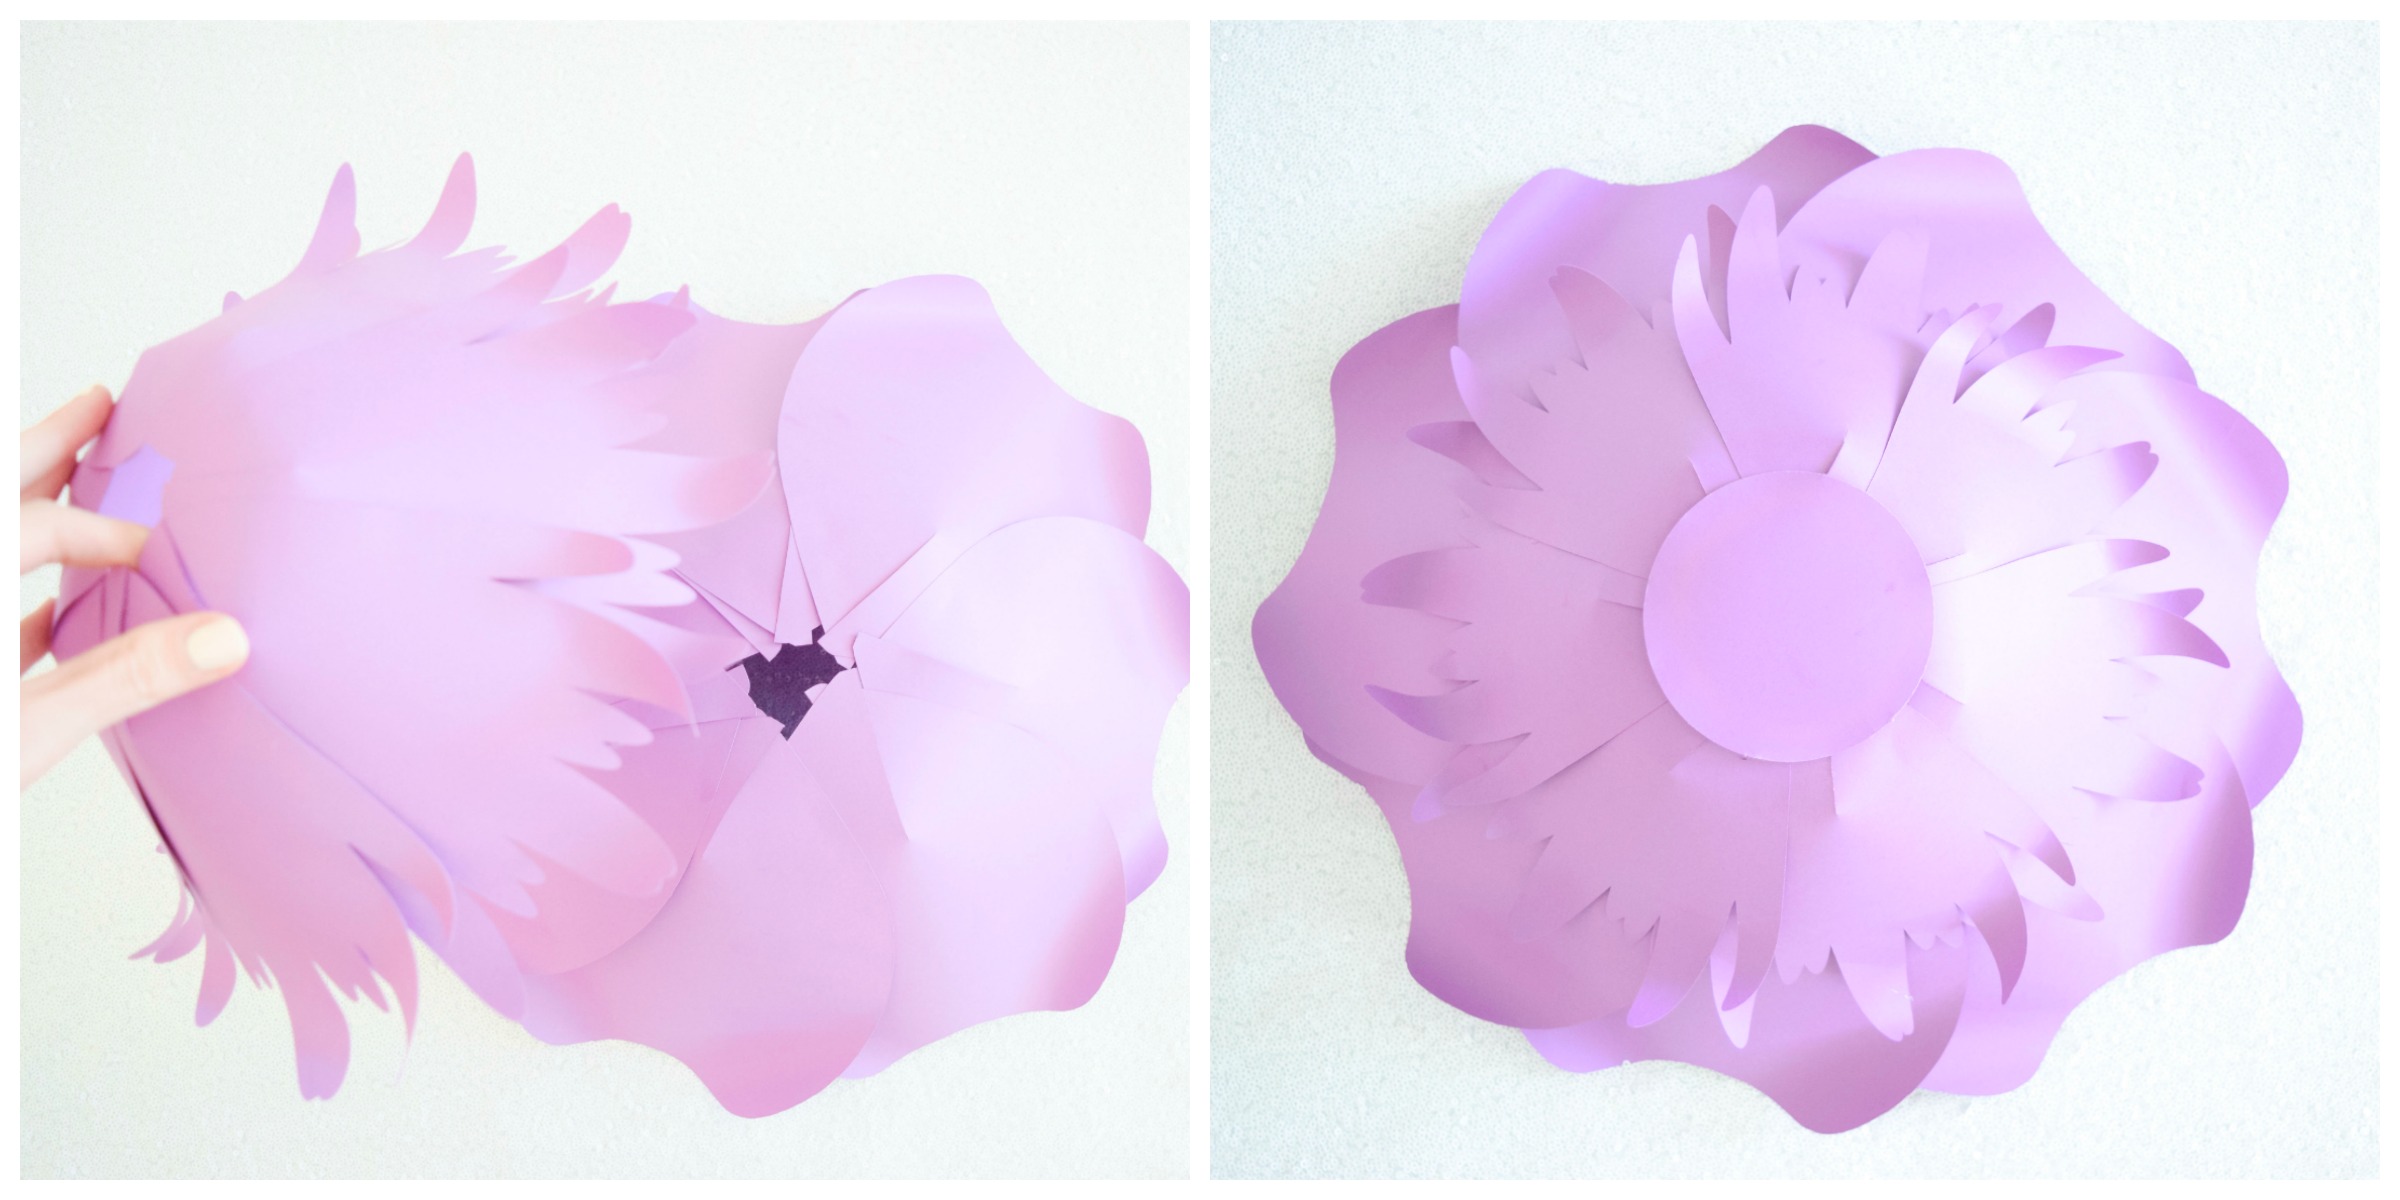 Side by side images show how to layer the multiple layers of the paper dress skirt, made with purple paper flower petals.